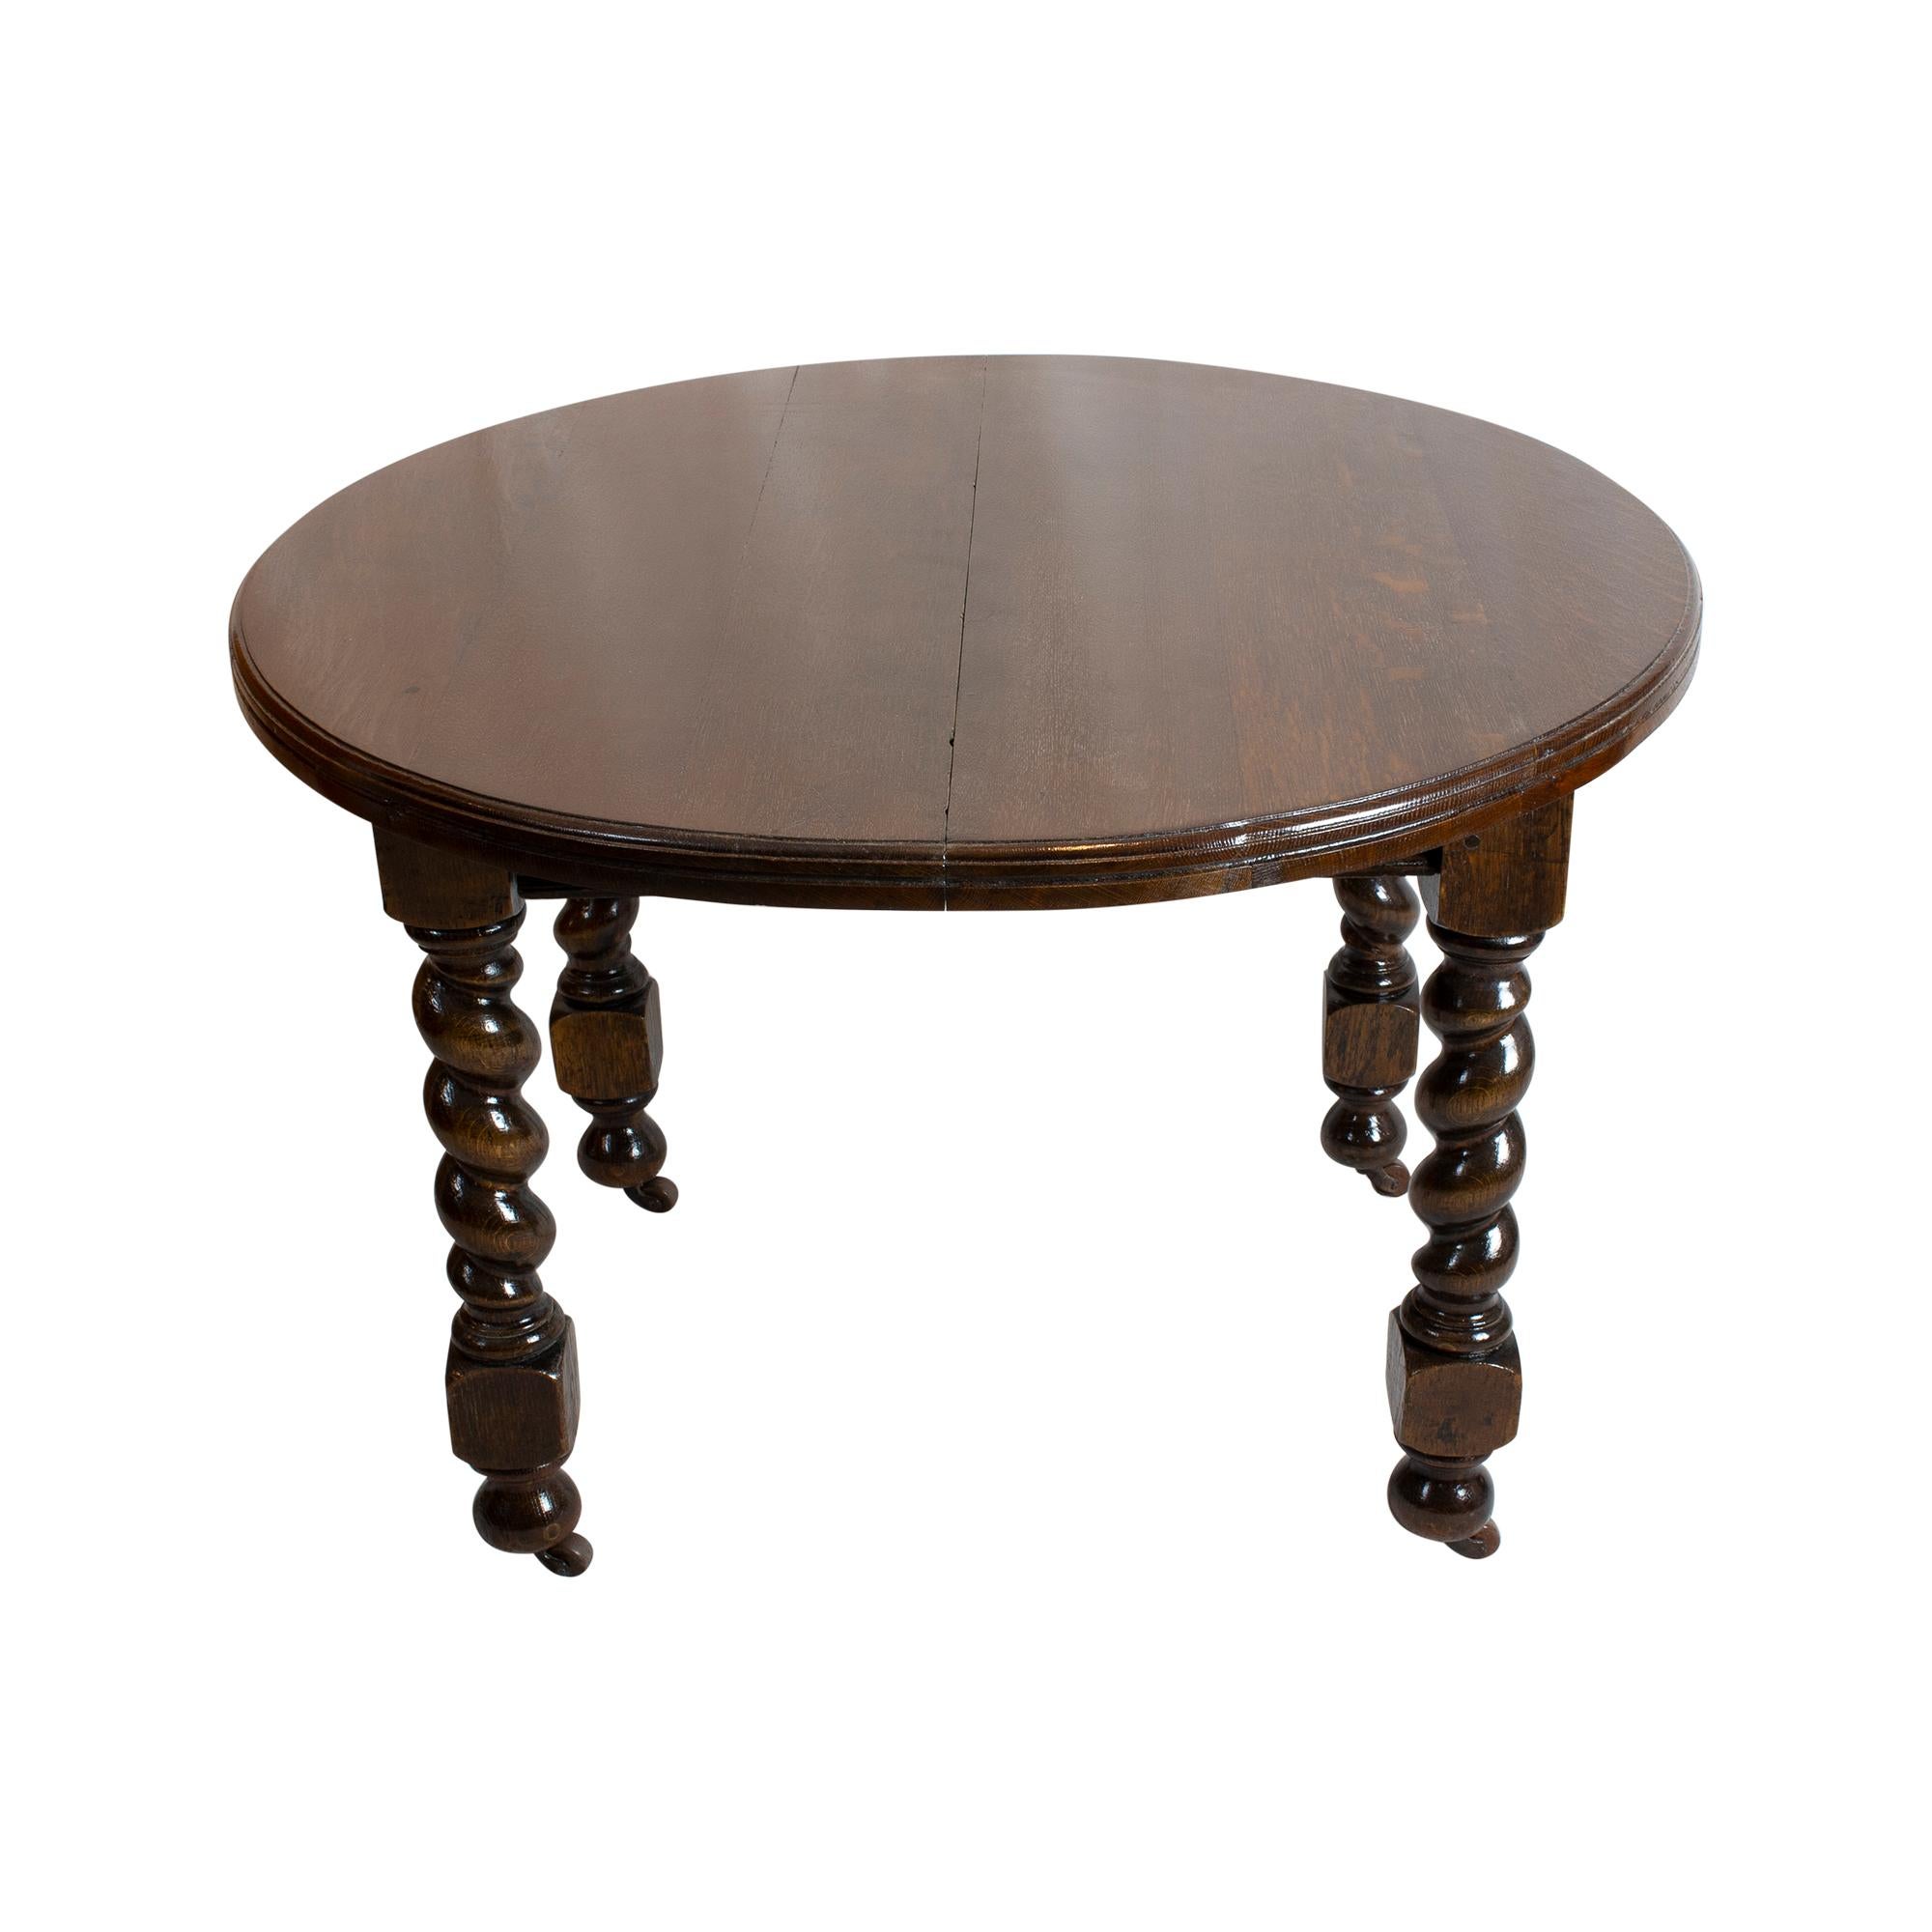 The table comes from England around 1880. The table was made of oak wood. Via a crank, which is included with the table, it can be cranked apart and an insert plate can be inserted, which enlarges the table by 43cm. The table stands on the original